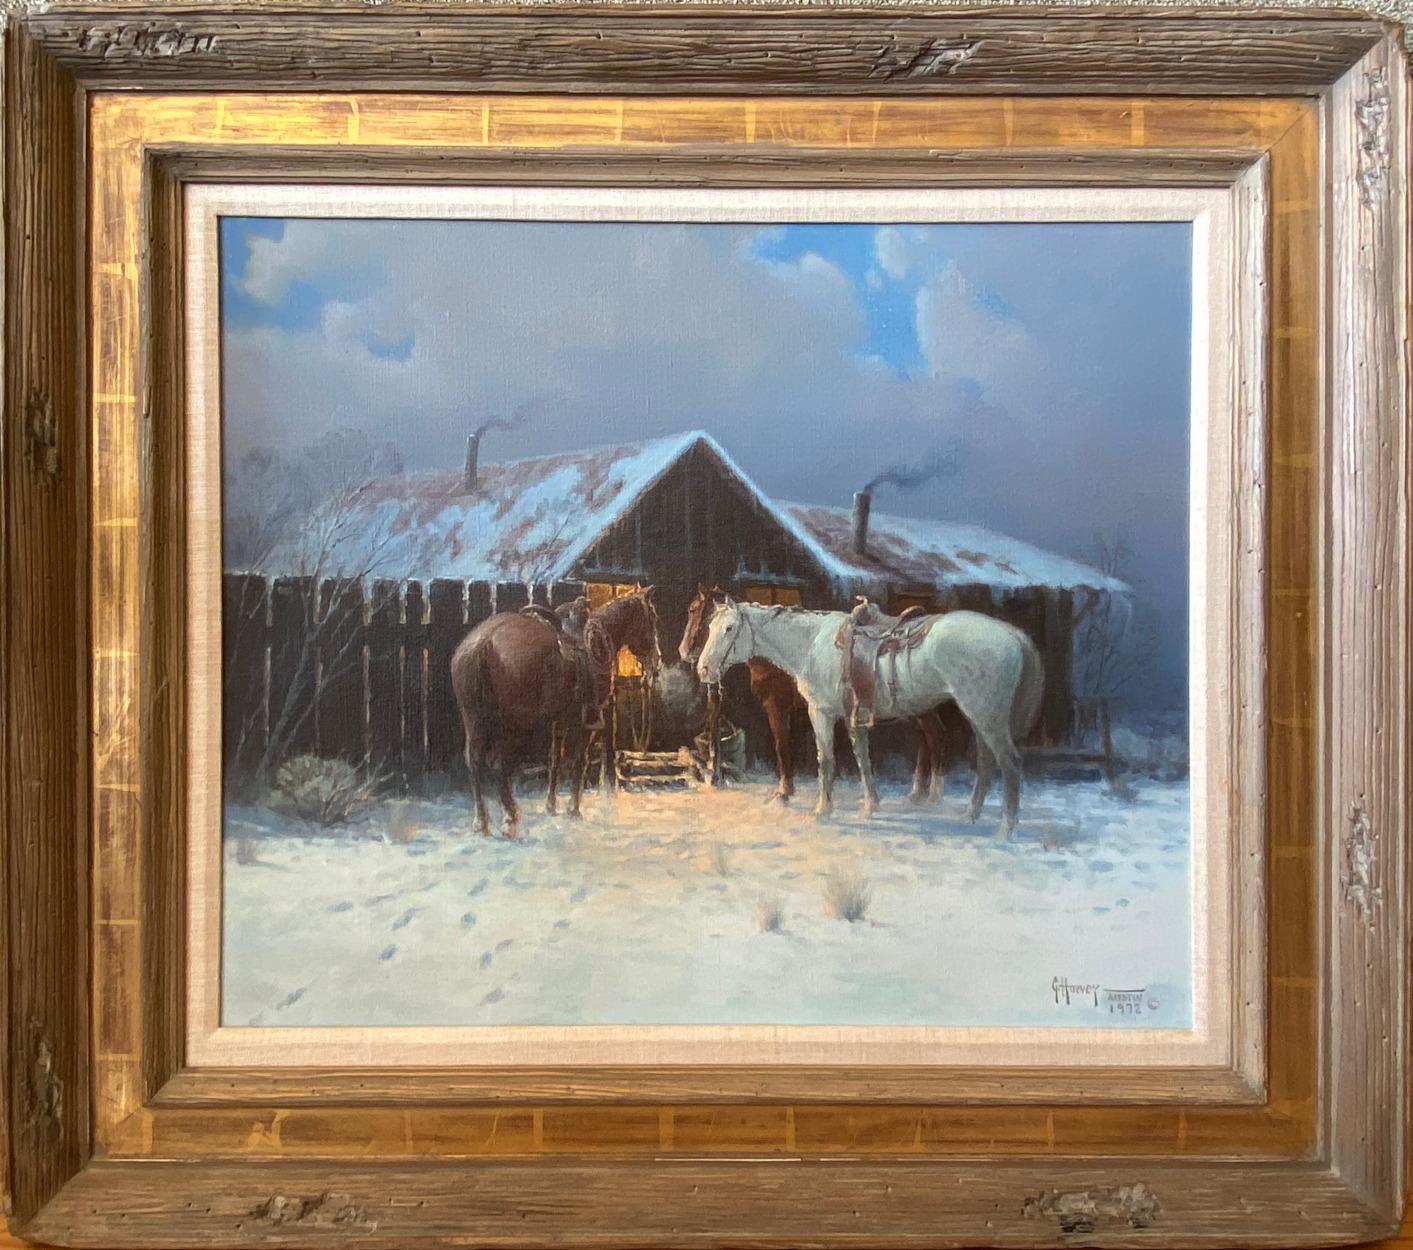 G. Harvey Landscape Painting - "WHEN NEIGHBORS COME CALLING"  WESTERN NOCTUNAL SNOW SCENE CABIN HORSES LIGHT